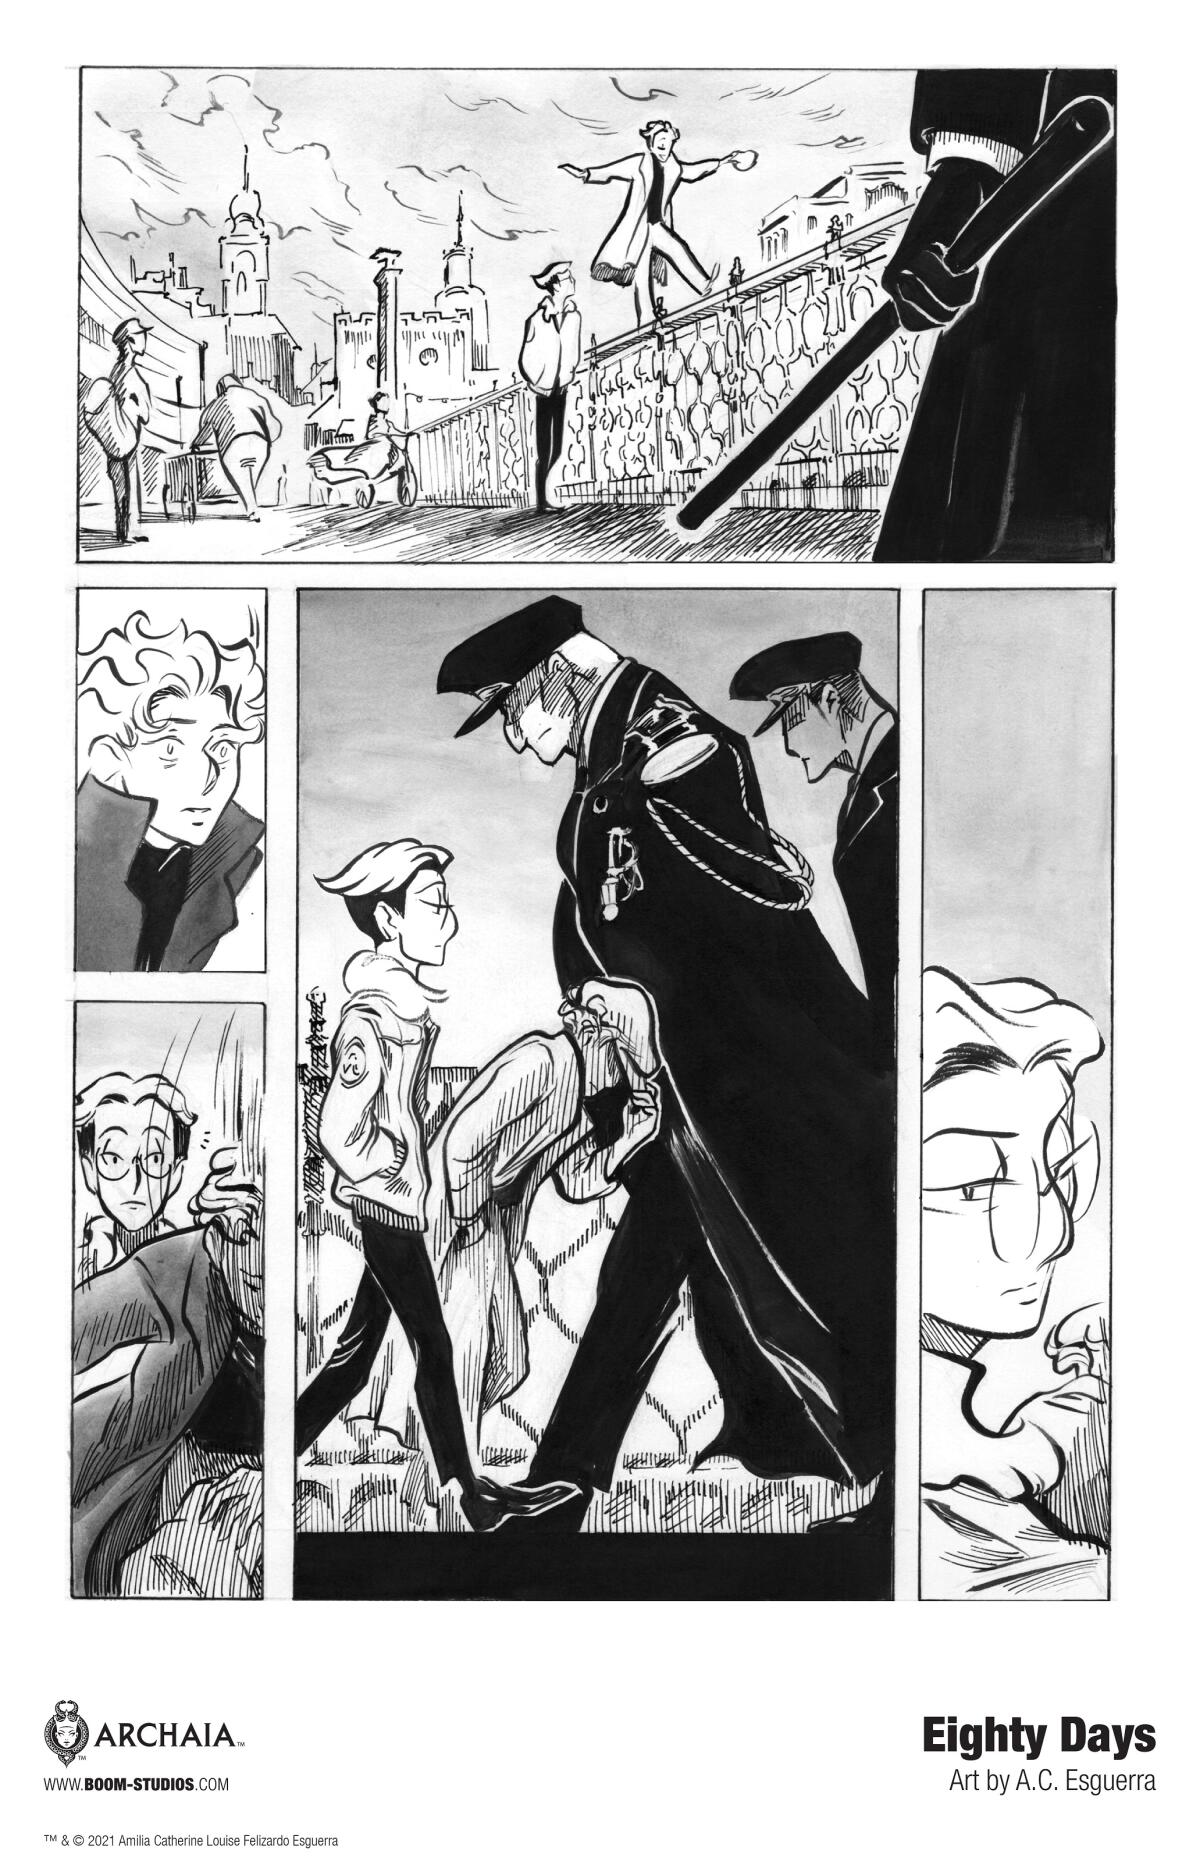 Comic book page with two young men walking past intimidating figures in cloaks